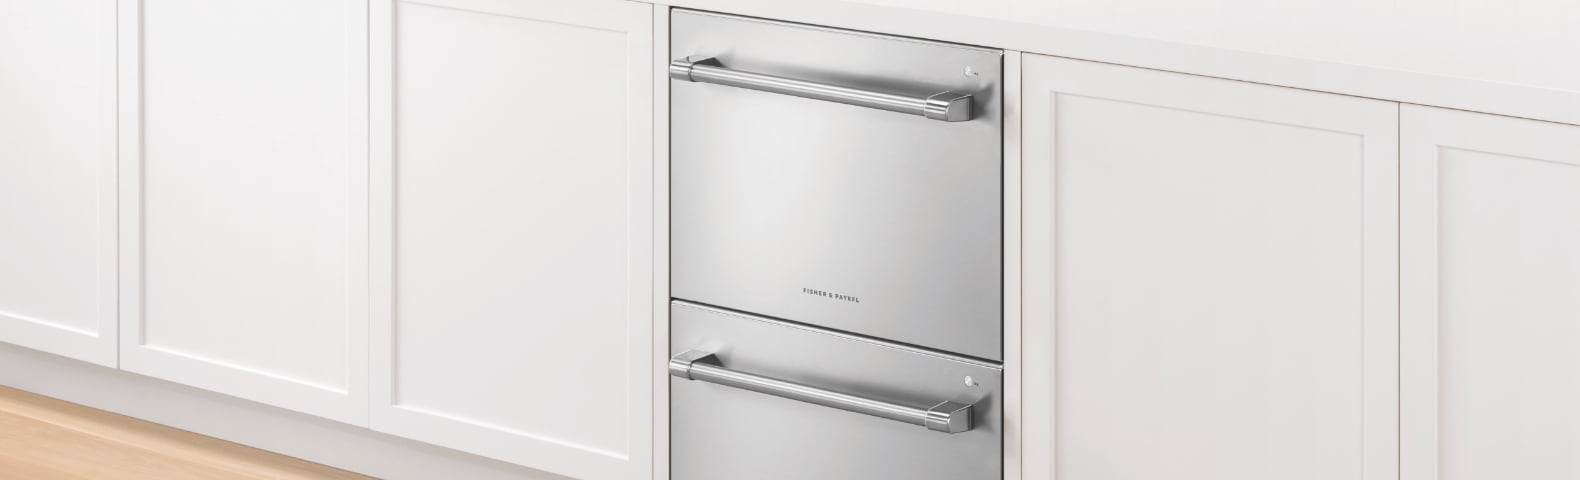 fisher and paykel lifestyle